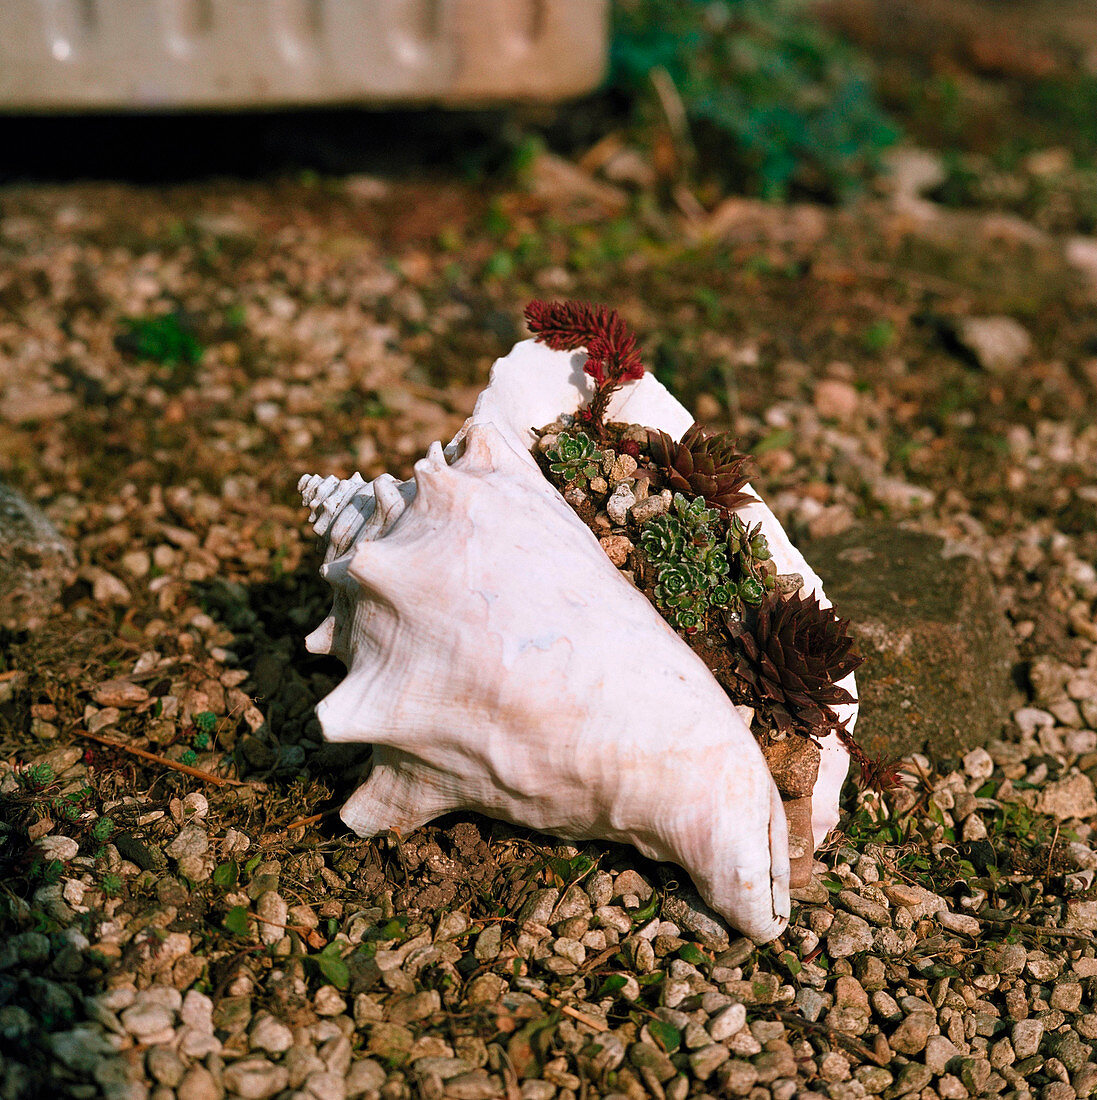 Conch shell used as planter